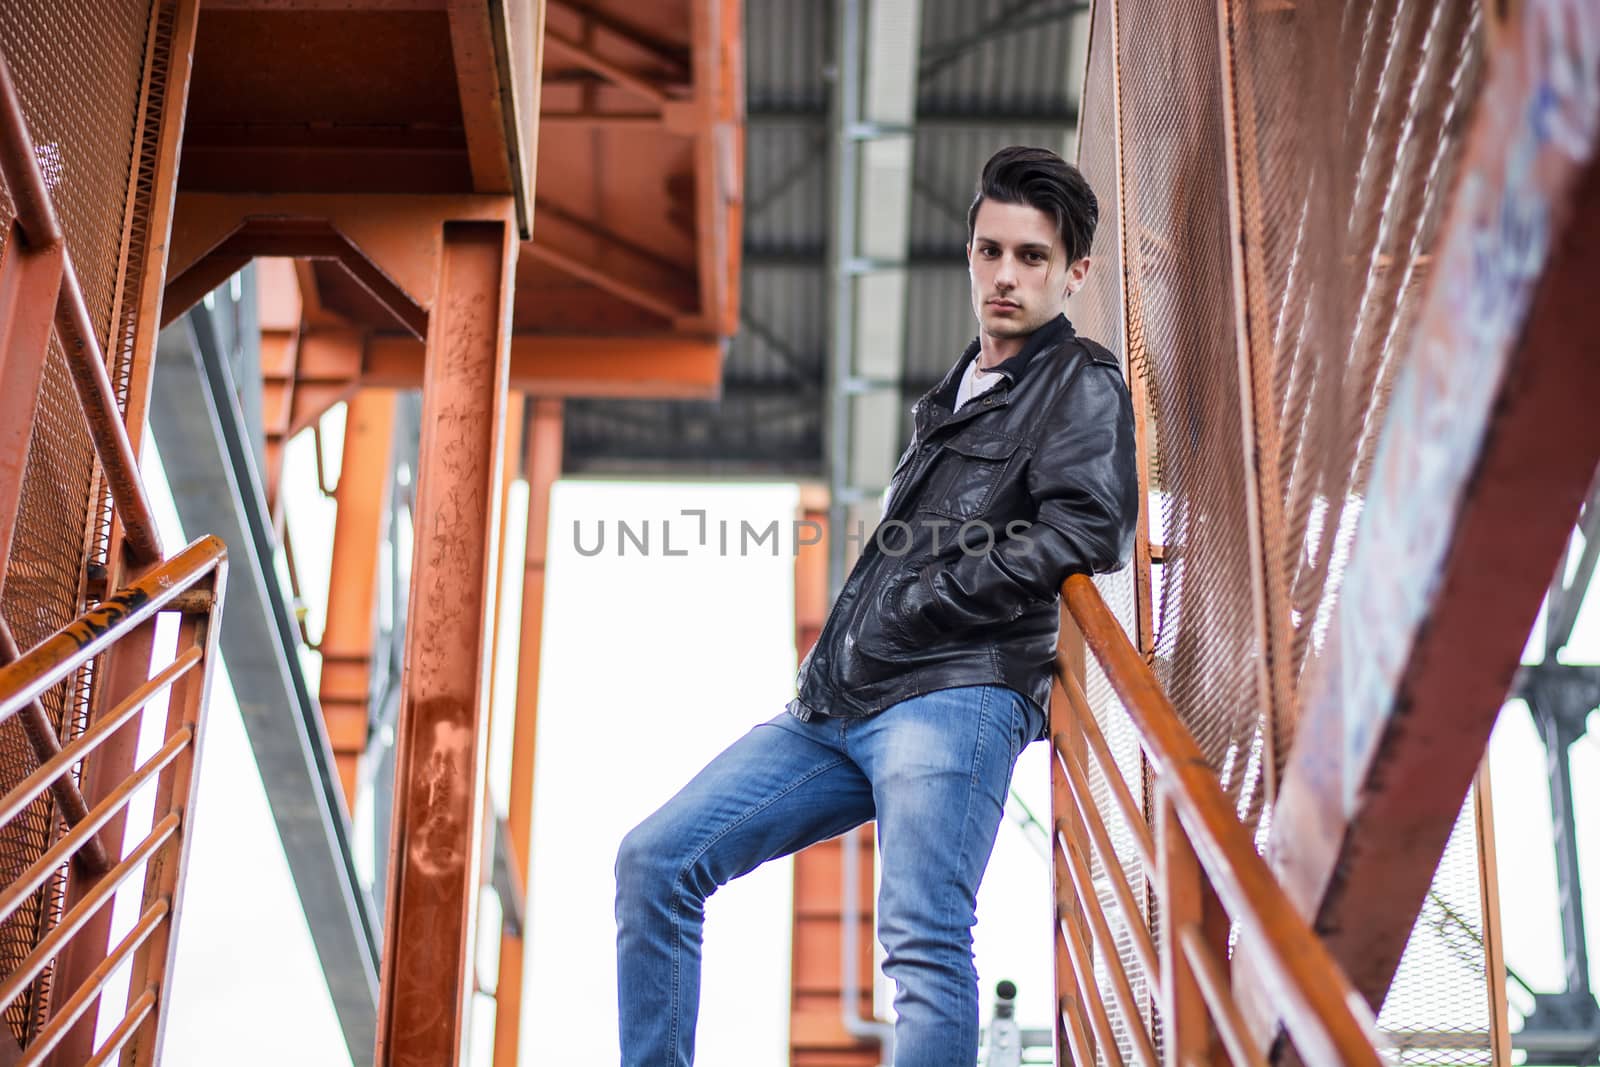 Young man standing outdoors in urban setting by artofphoto